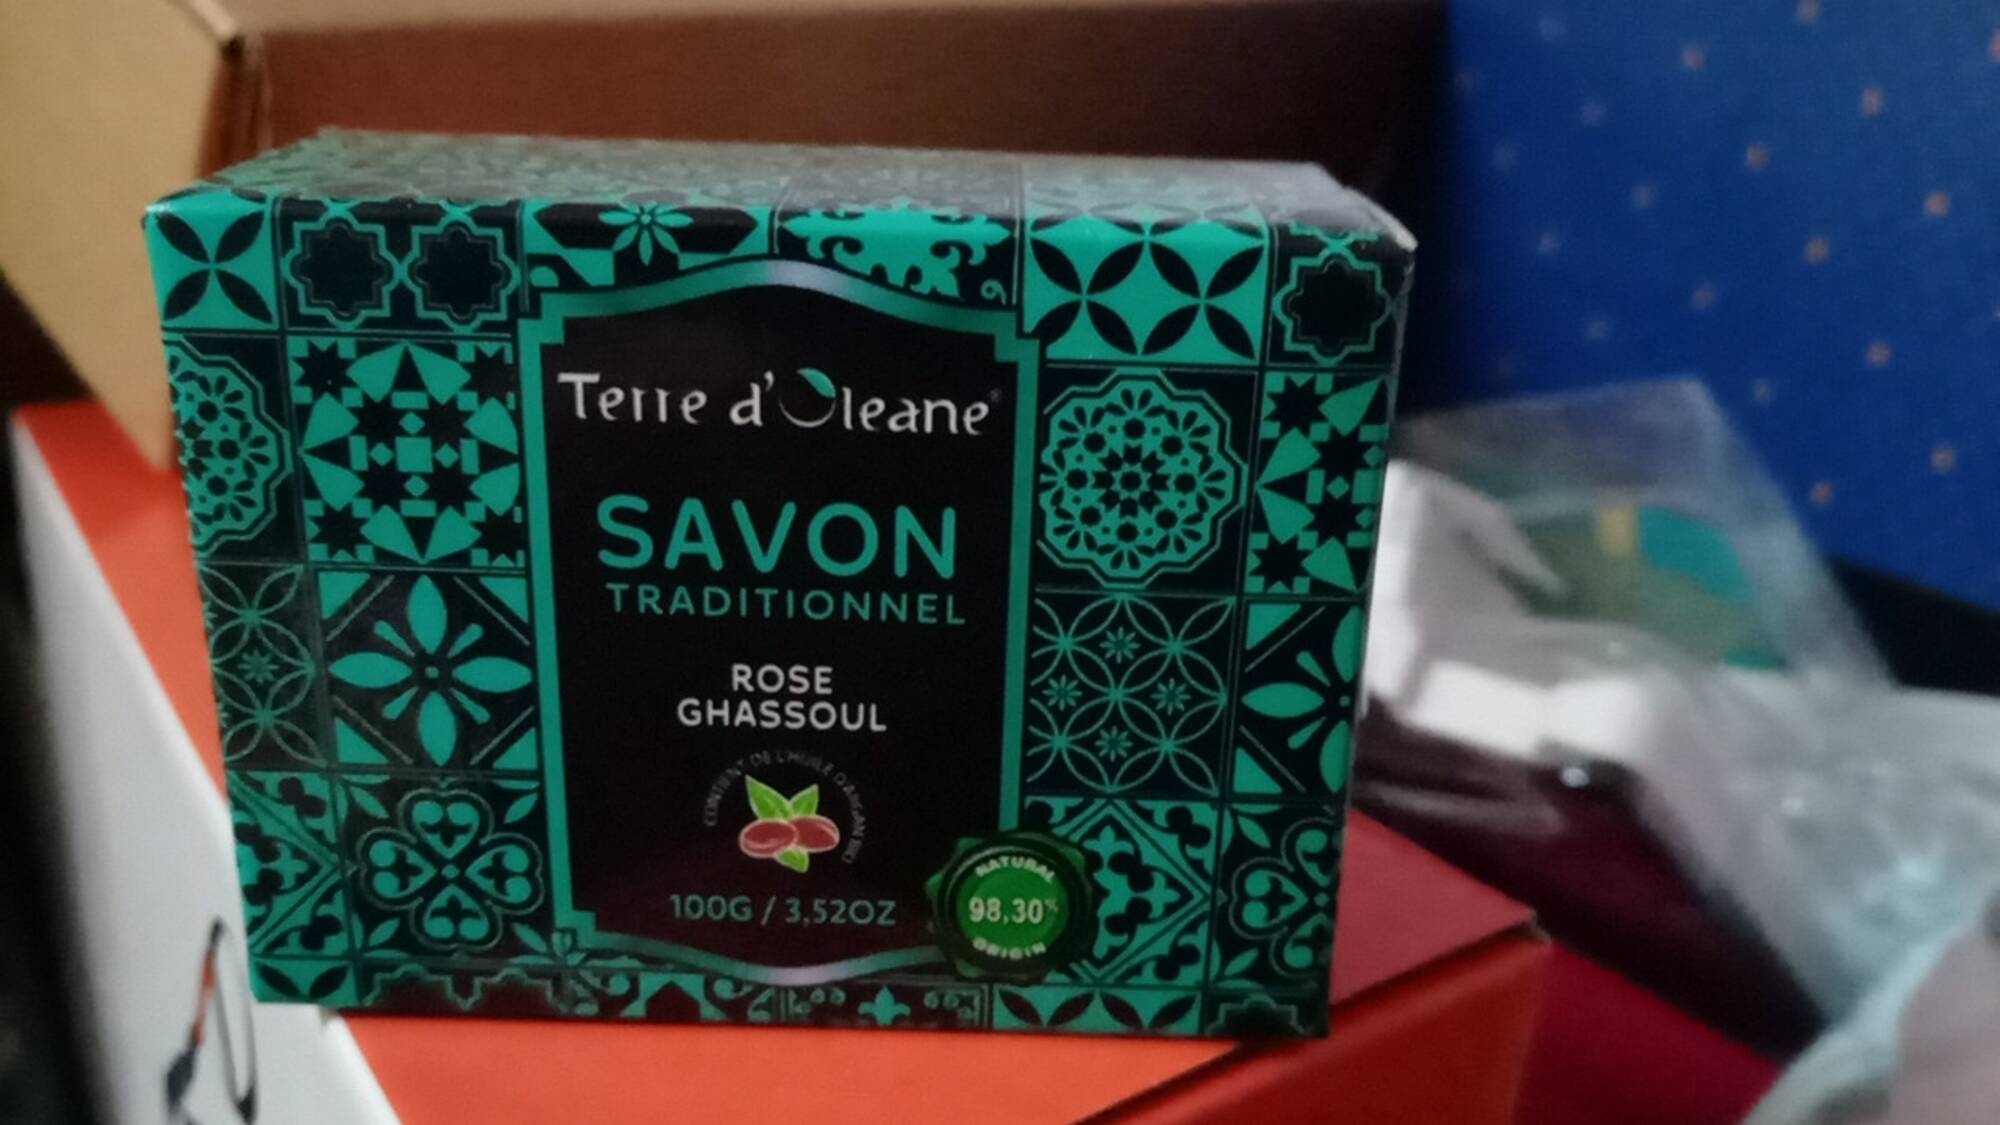 TERRE D'OLEANE - Rose Ghassoul - Savon traditionnel